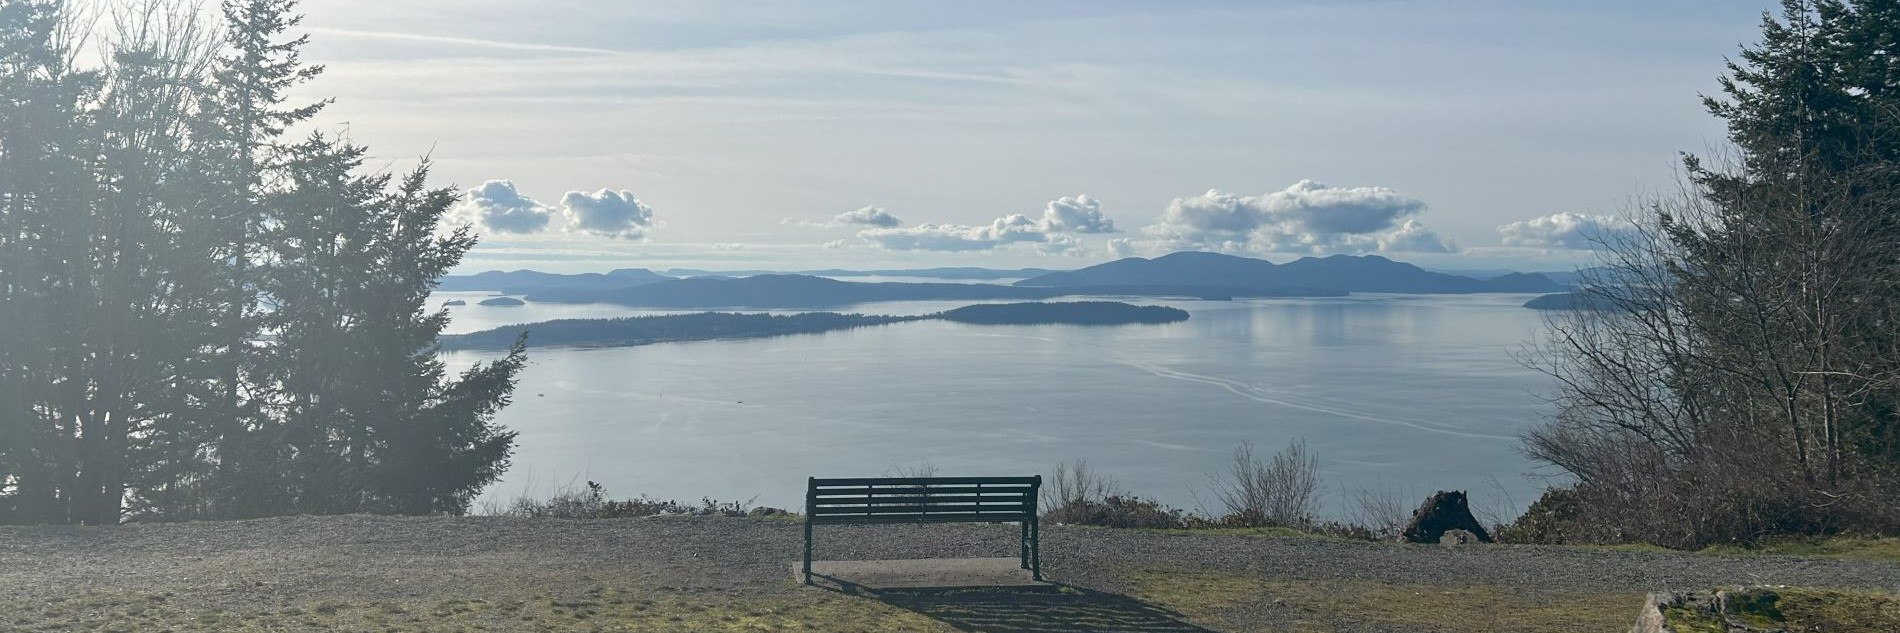 Empty bench overlooking Samish traditional territory